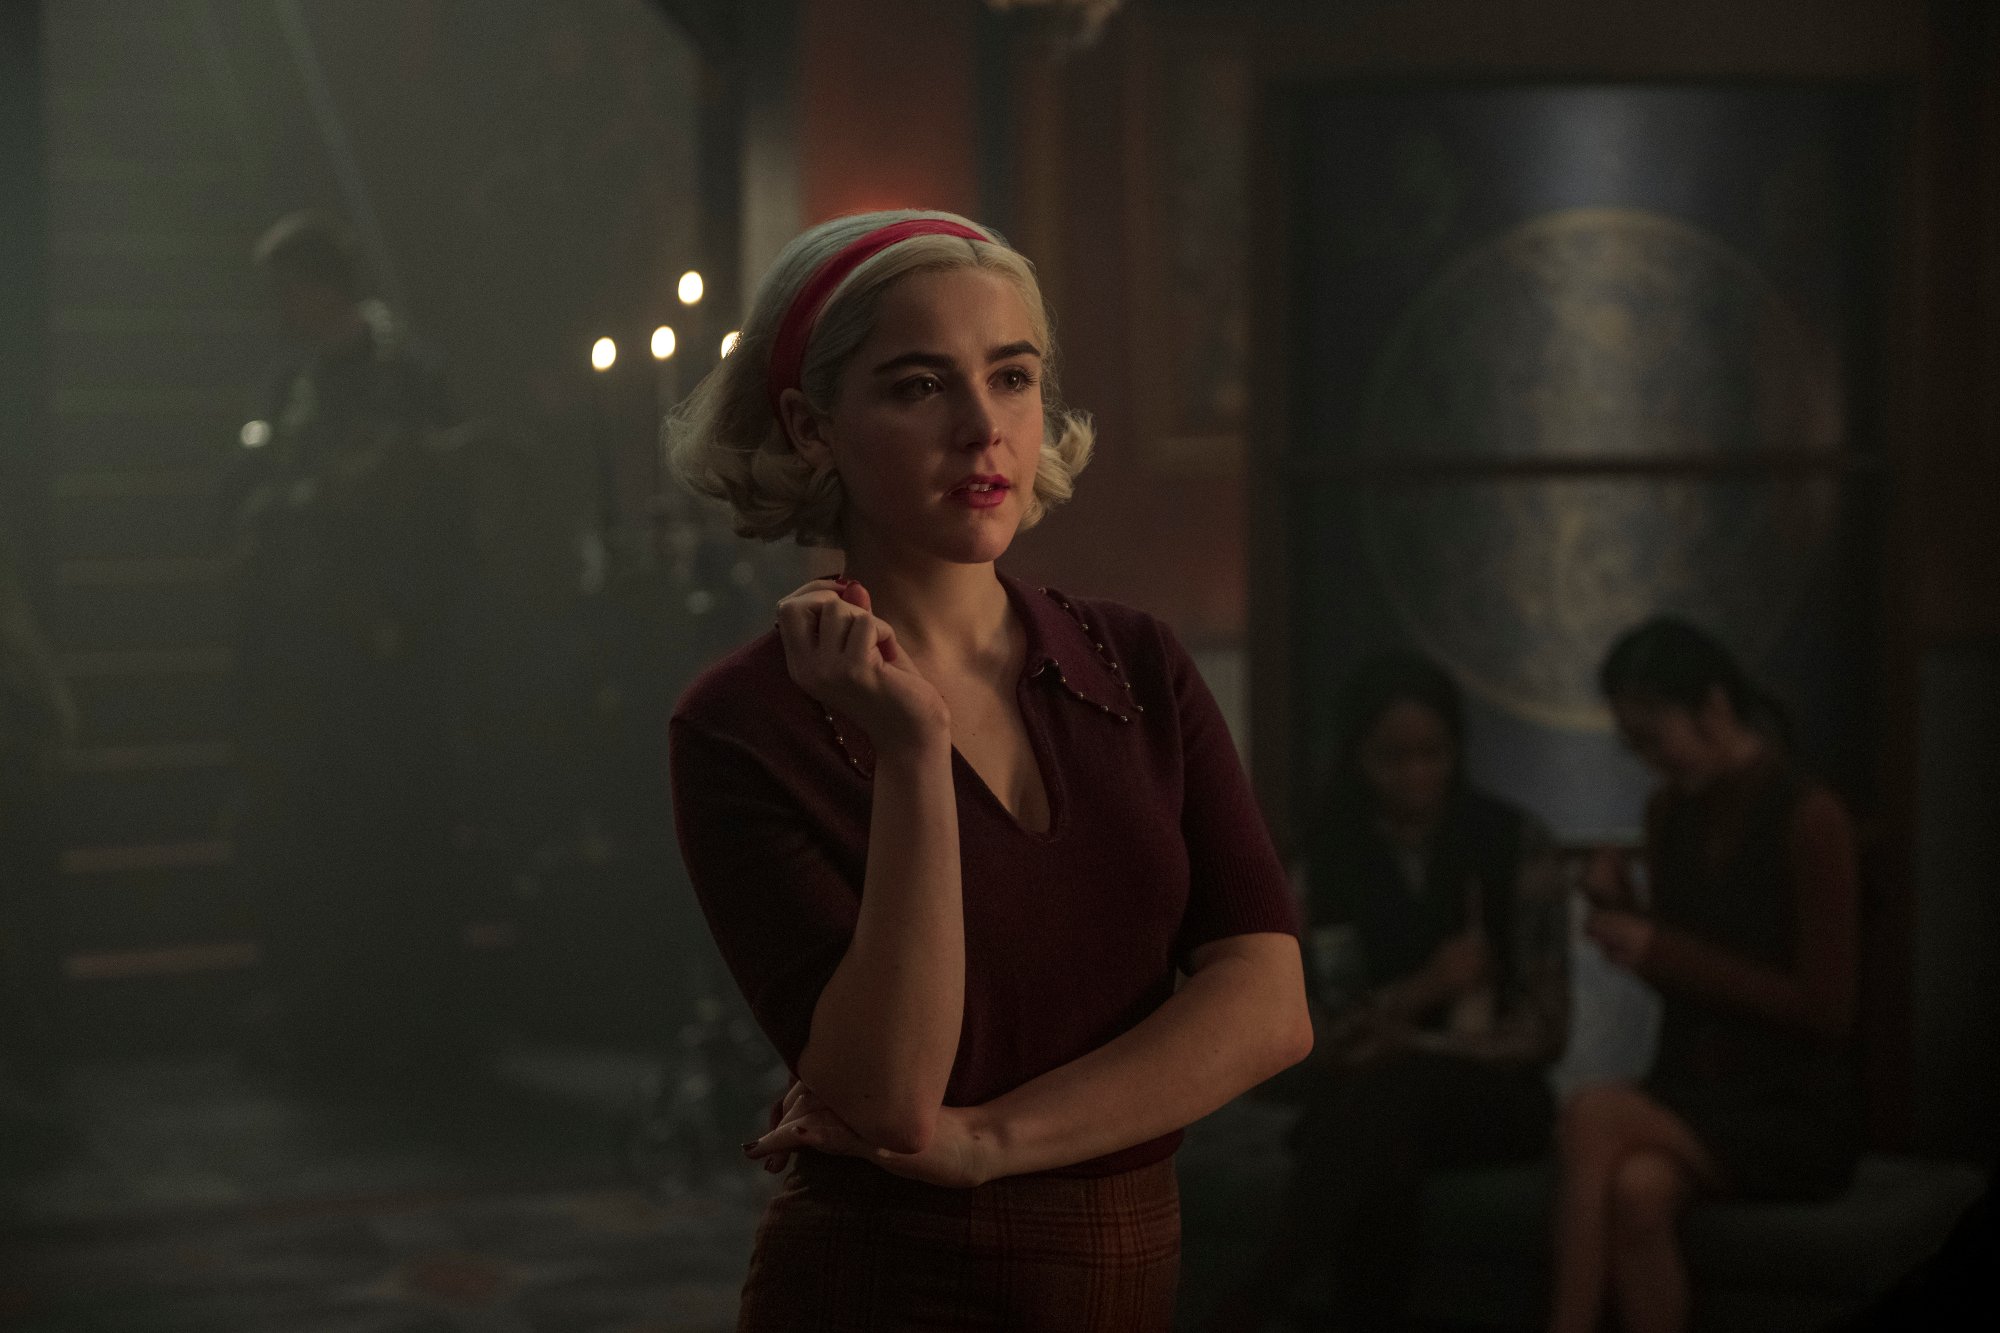 Kiernan Shipka as Sabrina Spellman in Netflix's 'Chilling Adventures of Sabrina.' She'll appear in 'Riverdale' Season 6 in what looks to be a Sabrina crossover.